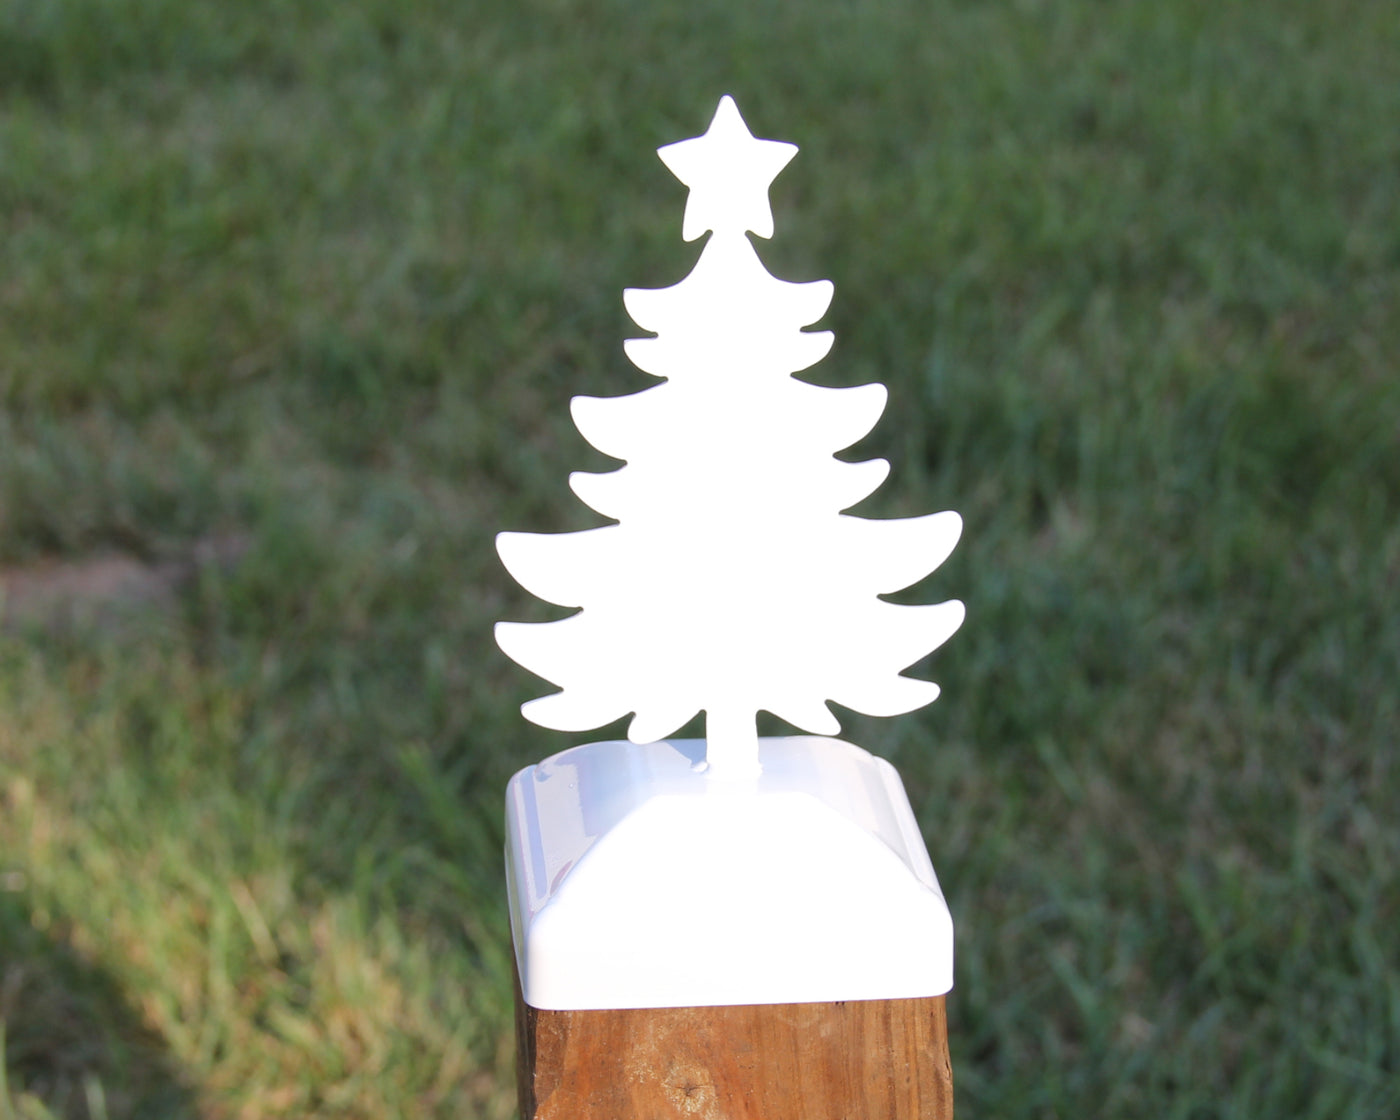 4x4 Christmas Tree Post Cap - Madison Iron and Wood - Post Cap - metal outdoor decor - Steel deocrations - american made products - veteran owned business products - fencing decorations - fencing supplies - custom wall decorations - personalized wall signs - steel - decorative post caps - steel post caps - metal post caps - brackets - structural brackets - home improvement - easter - easter decorations - easter gift - easter yard decor